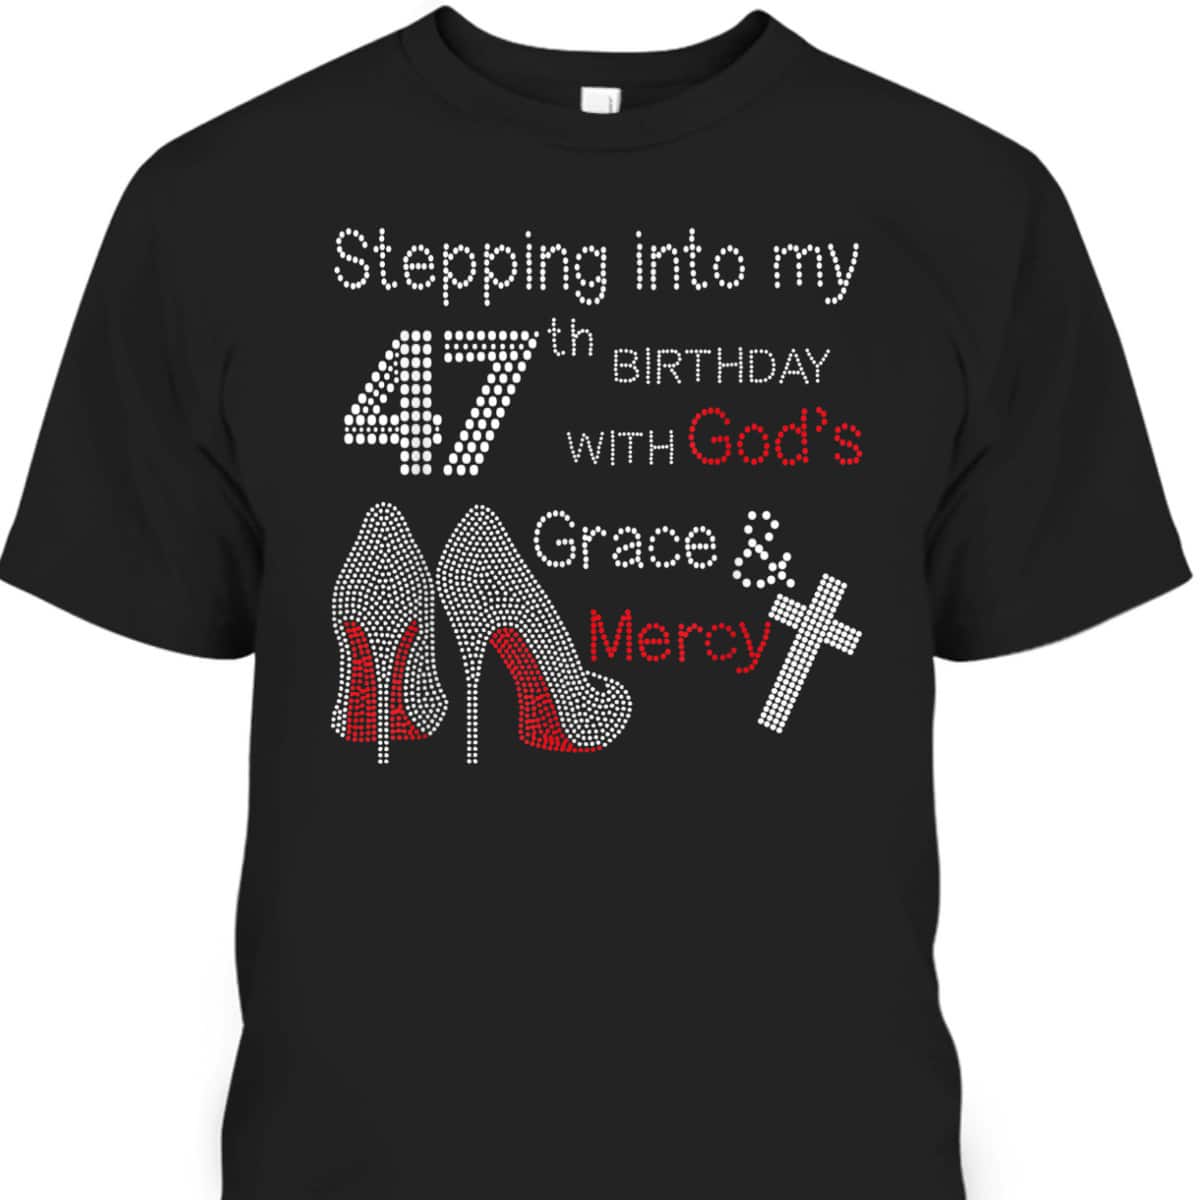 Stepping Into My 47th Birthday With God's Grace And Mercy Christian Birthday T-Shirt